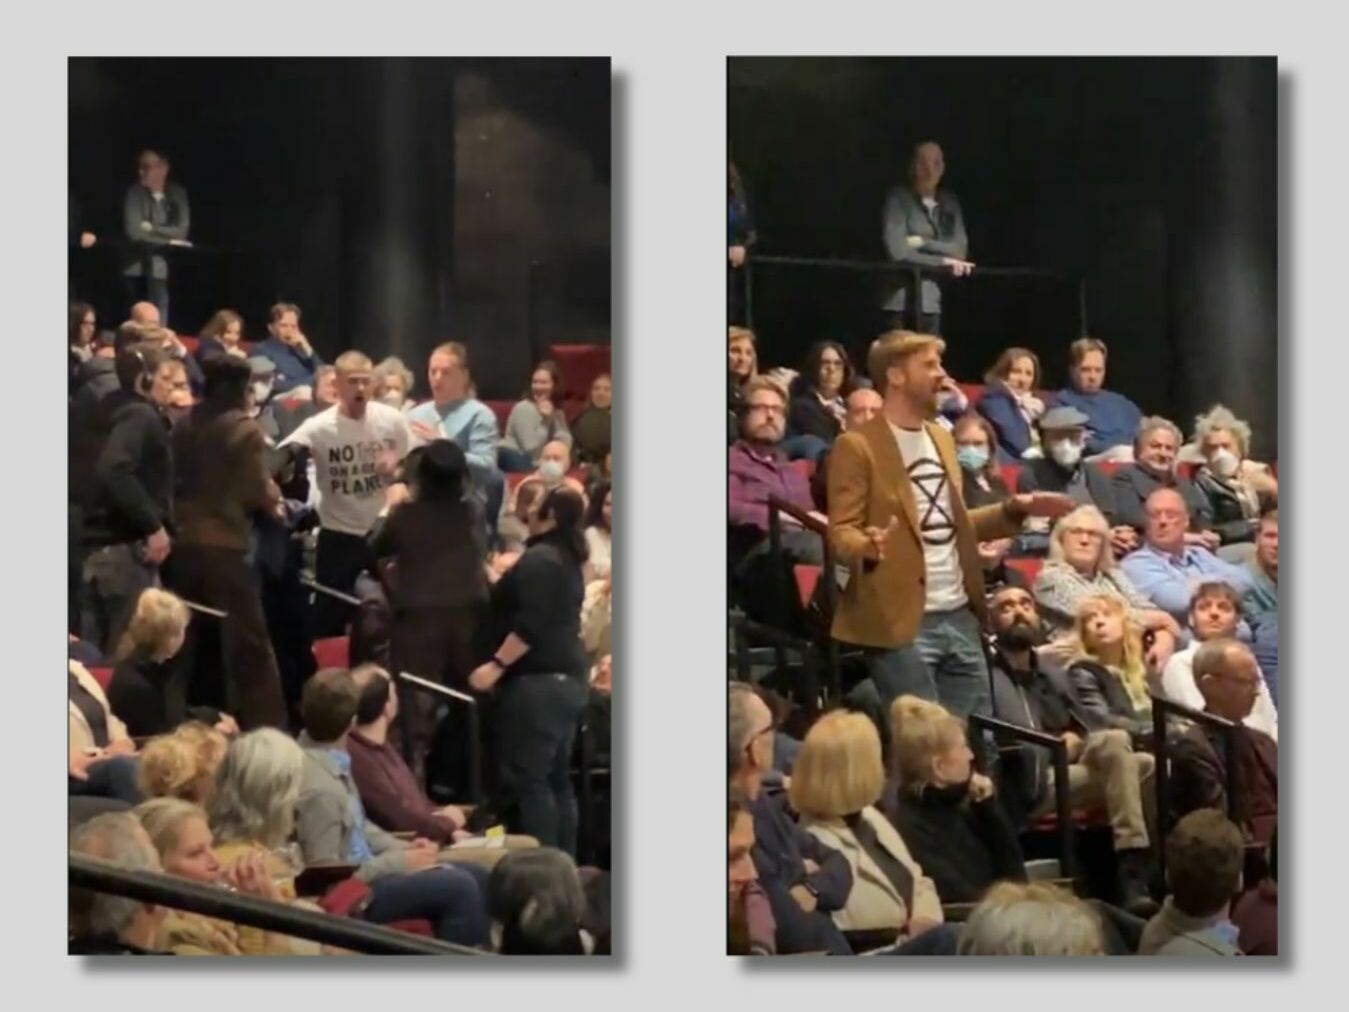 Activists from Extinction Rebellion, left and center, protest during a performance of An Enemy of the People on Broadway, starring Jeremy Strong, right.